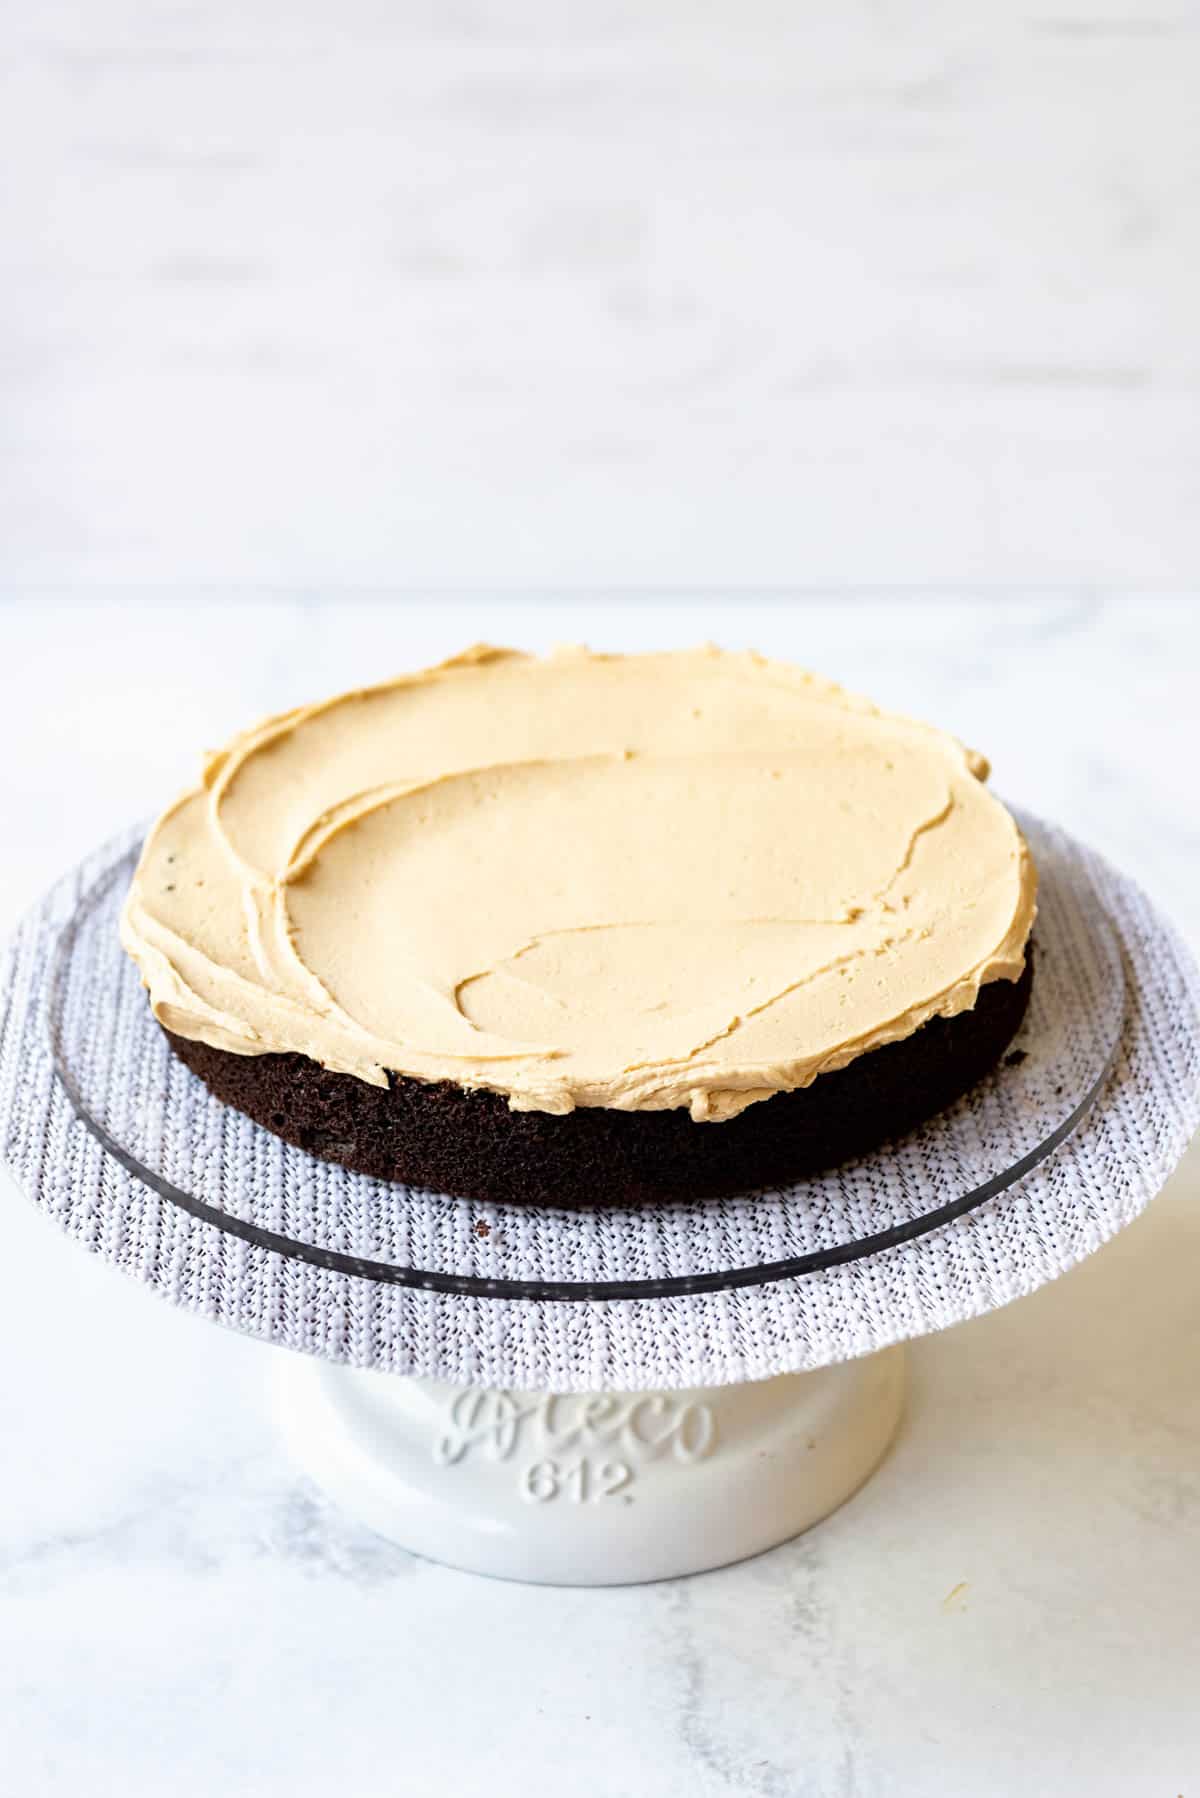 A white cake stand with a wingle tier of chocolate cake on it, with peanut butter frosting on top.